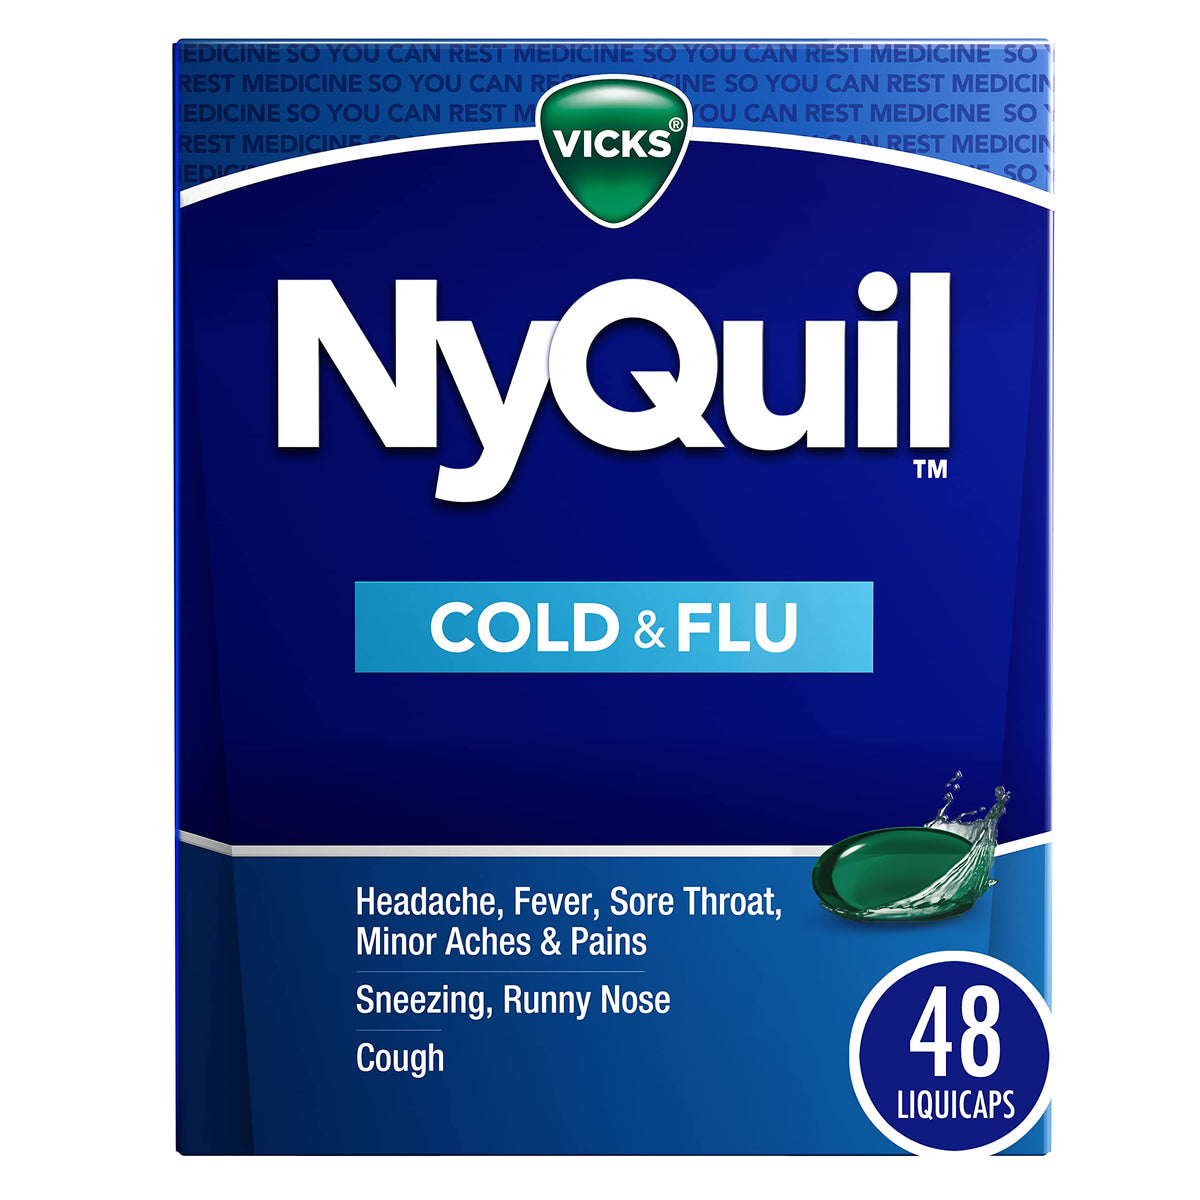 Vicks NyQuil Cold and Flu Relief Liquid Medicine, Powerful Multi-Symptom Nighttime Relief for Headache, Fever, Sore Throat, Minor Aches and Pains, Sneezing, Runny Nose, and Cough, 48 Liquicaps